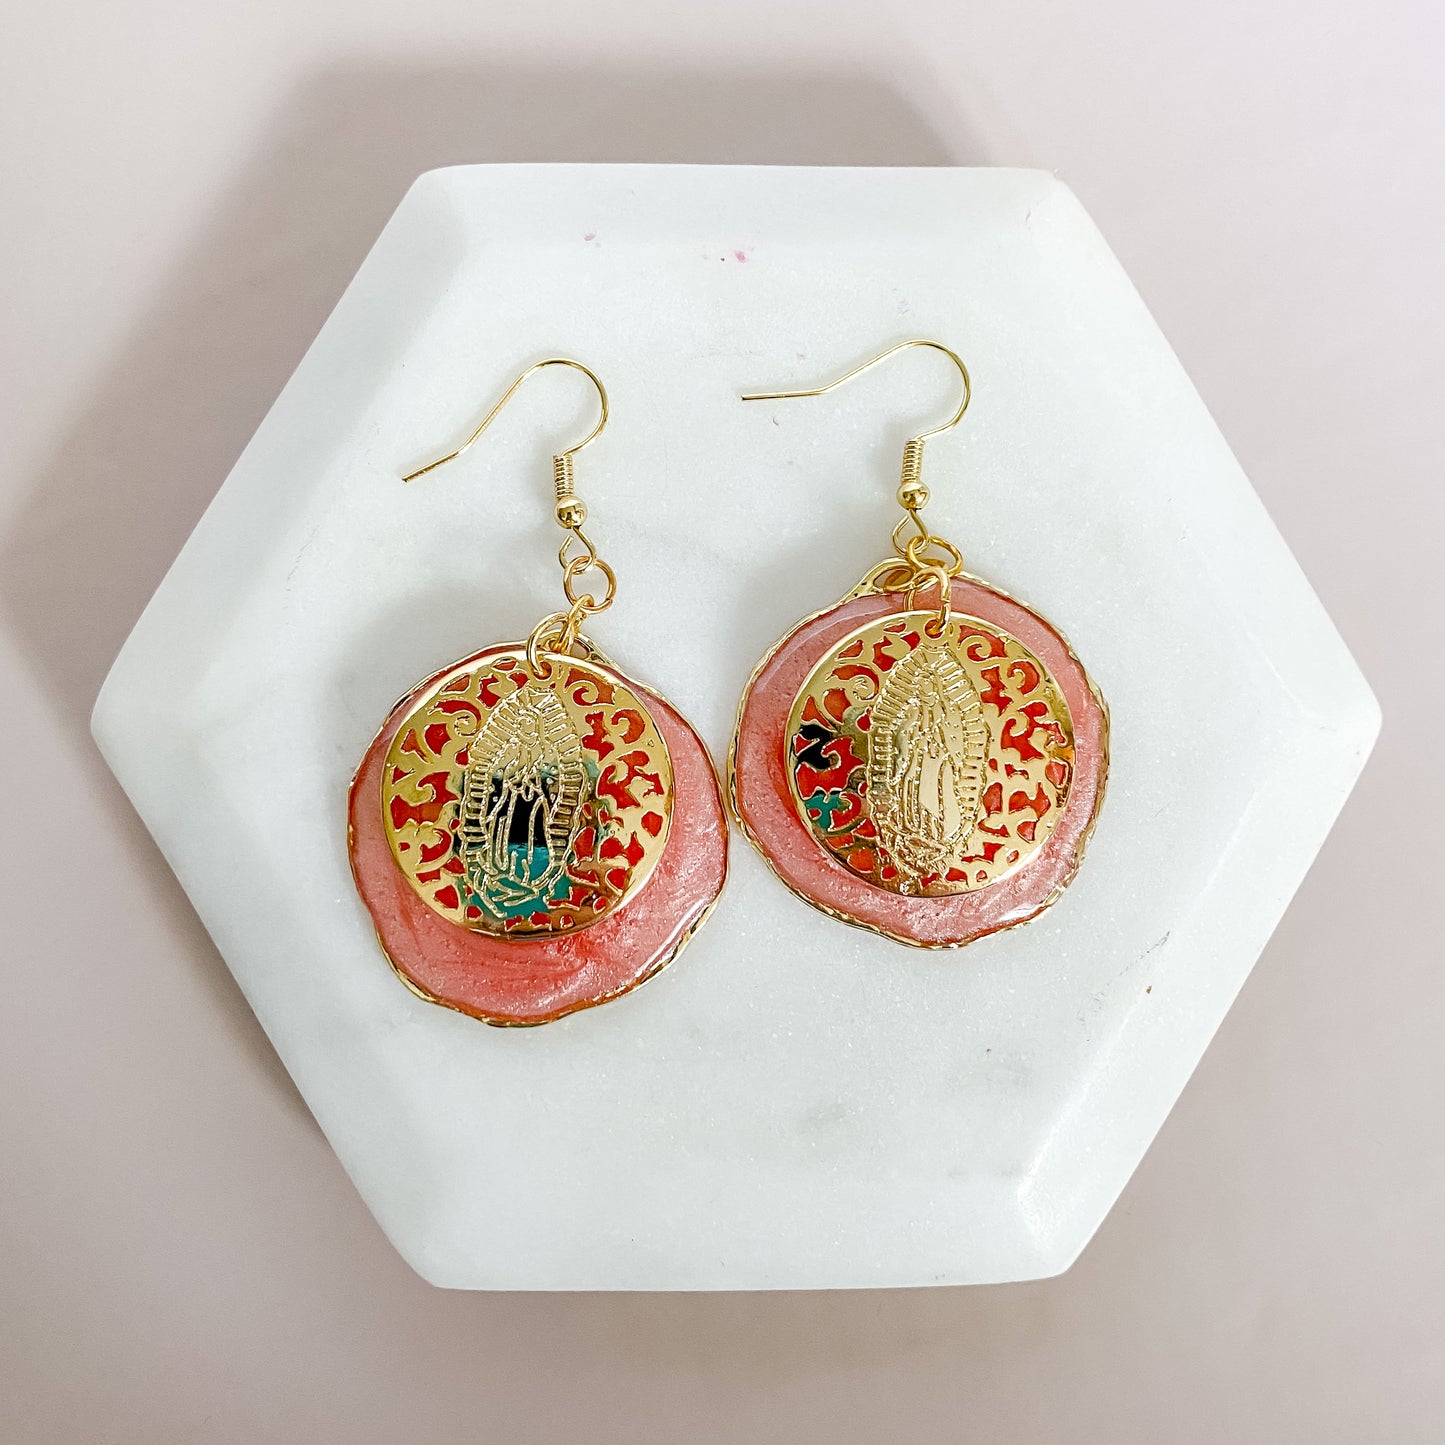 Earrings - Our Lady of Guadalupe Charm